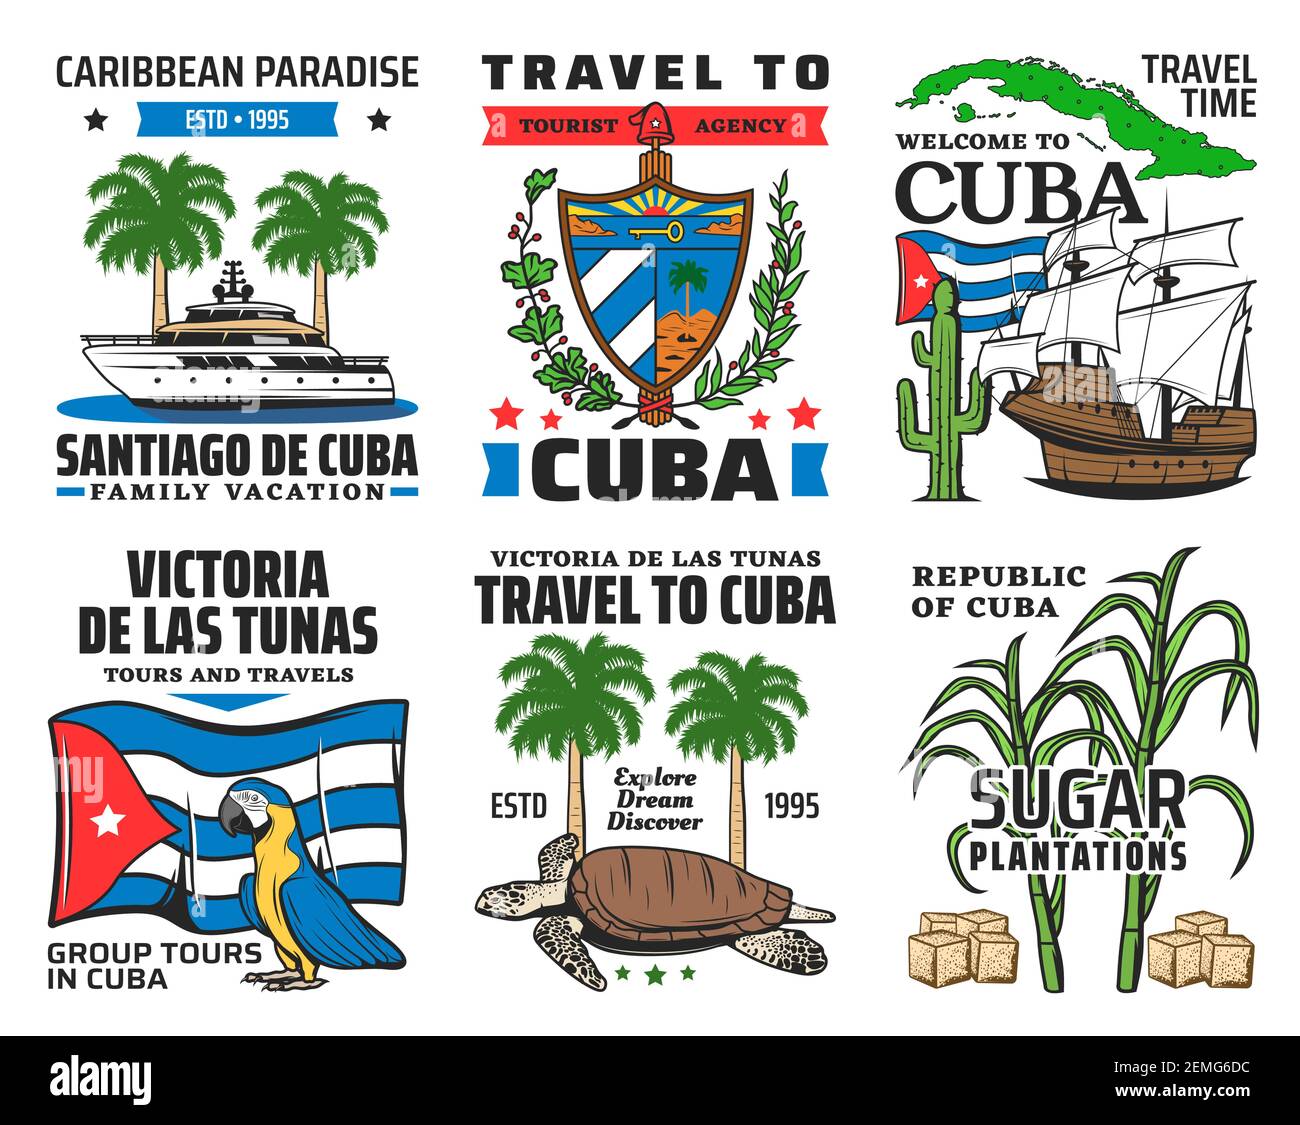 Cuba tourist travel, caribbean paradise family vacation icons. Yacht and royal palm, cuban coat of arms and national flag, macaw parrot, sea turtle, s Stock Vector